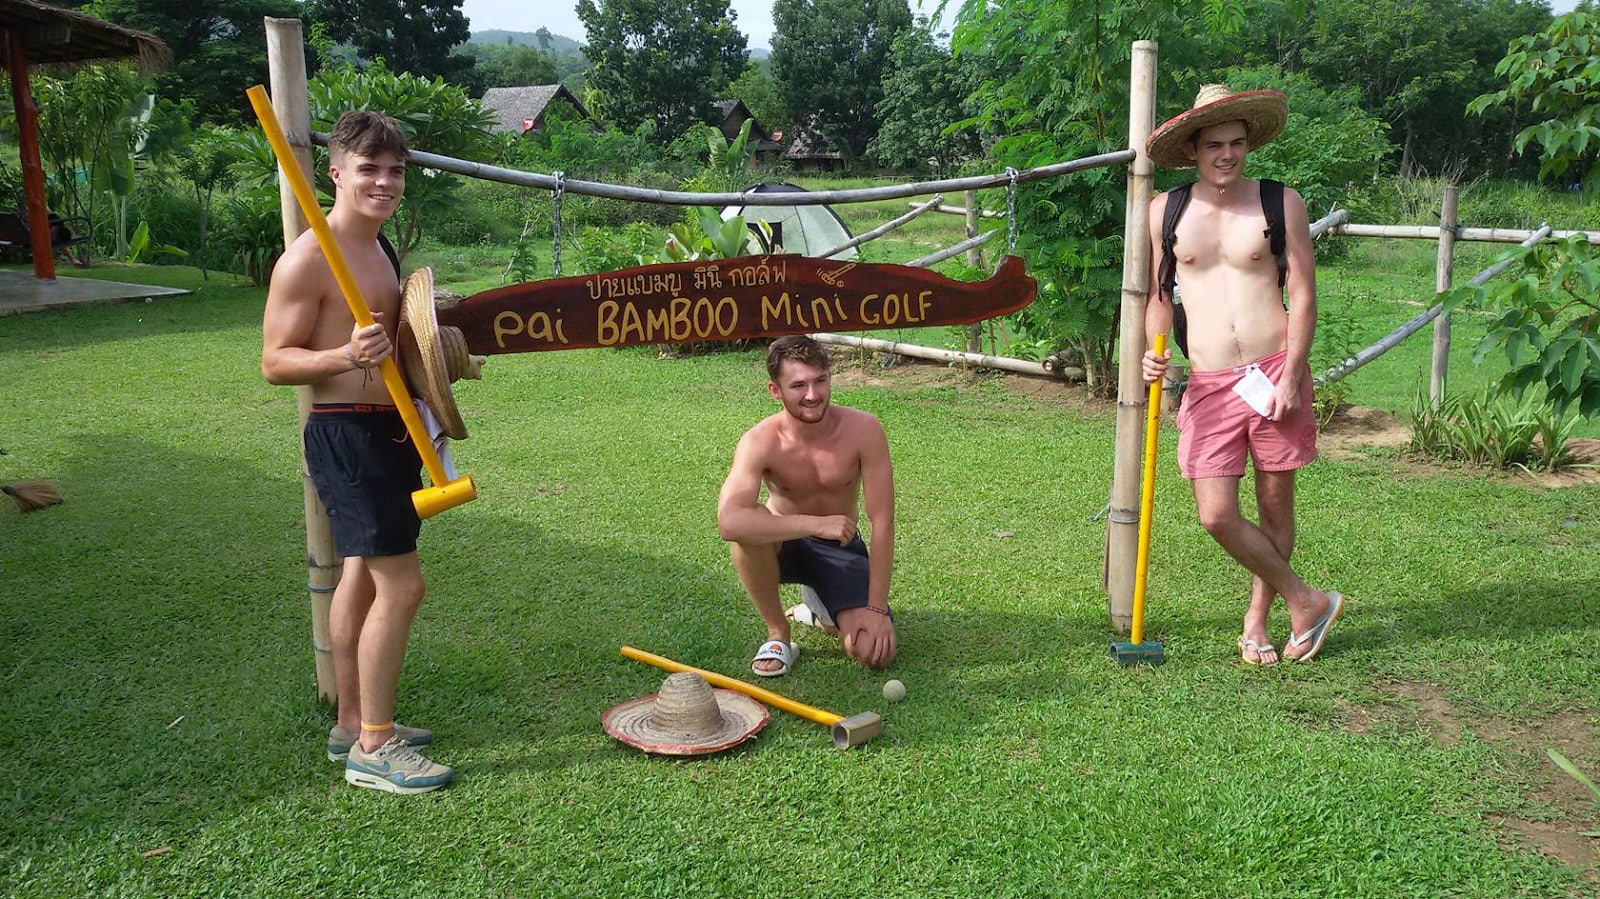 Players at the Pai Bamboo Mini Golf Course